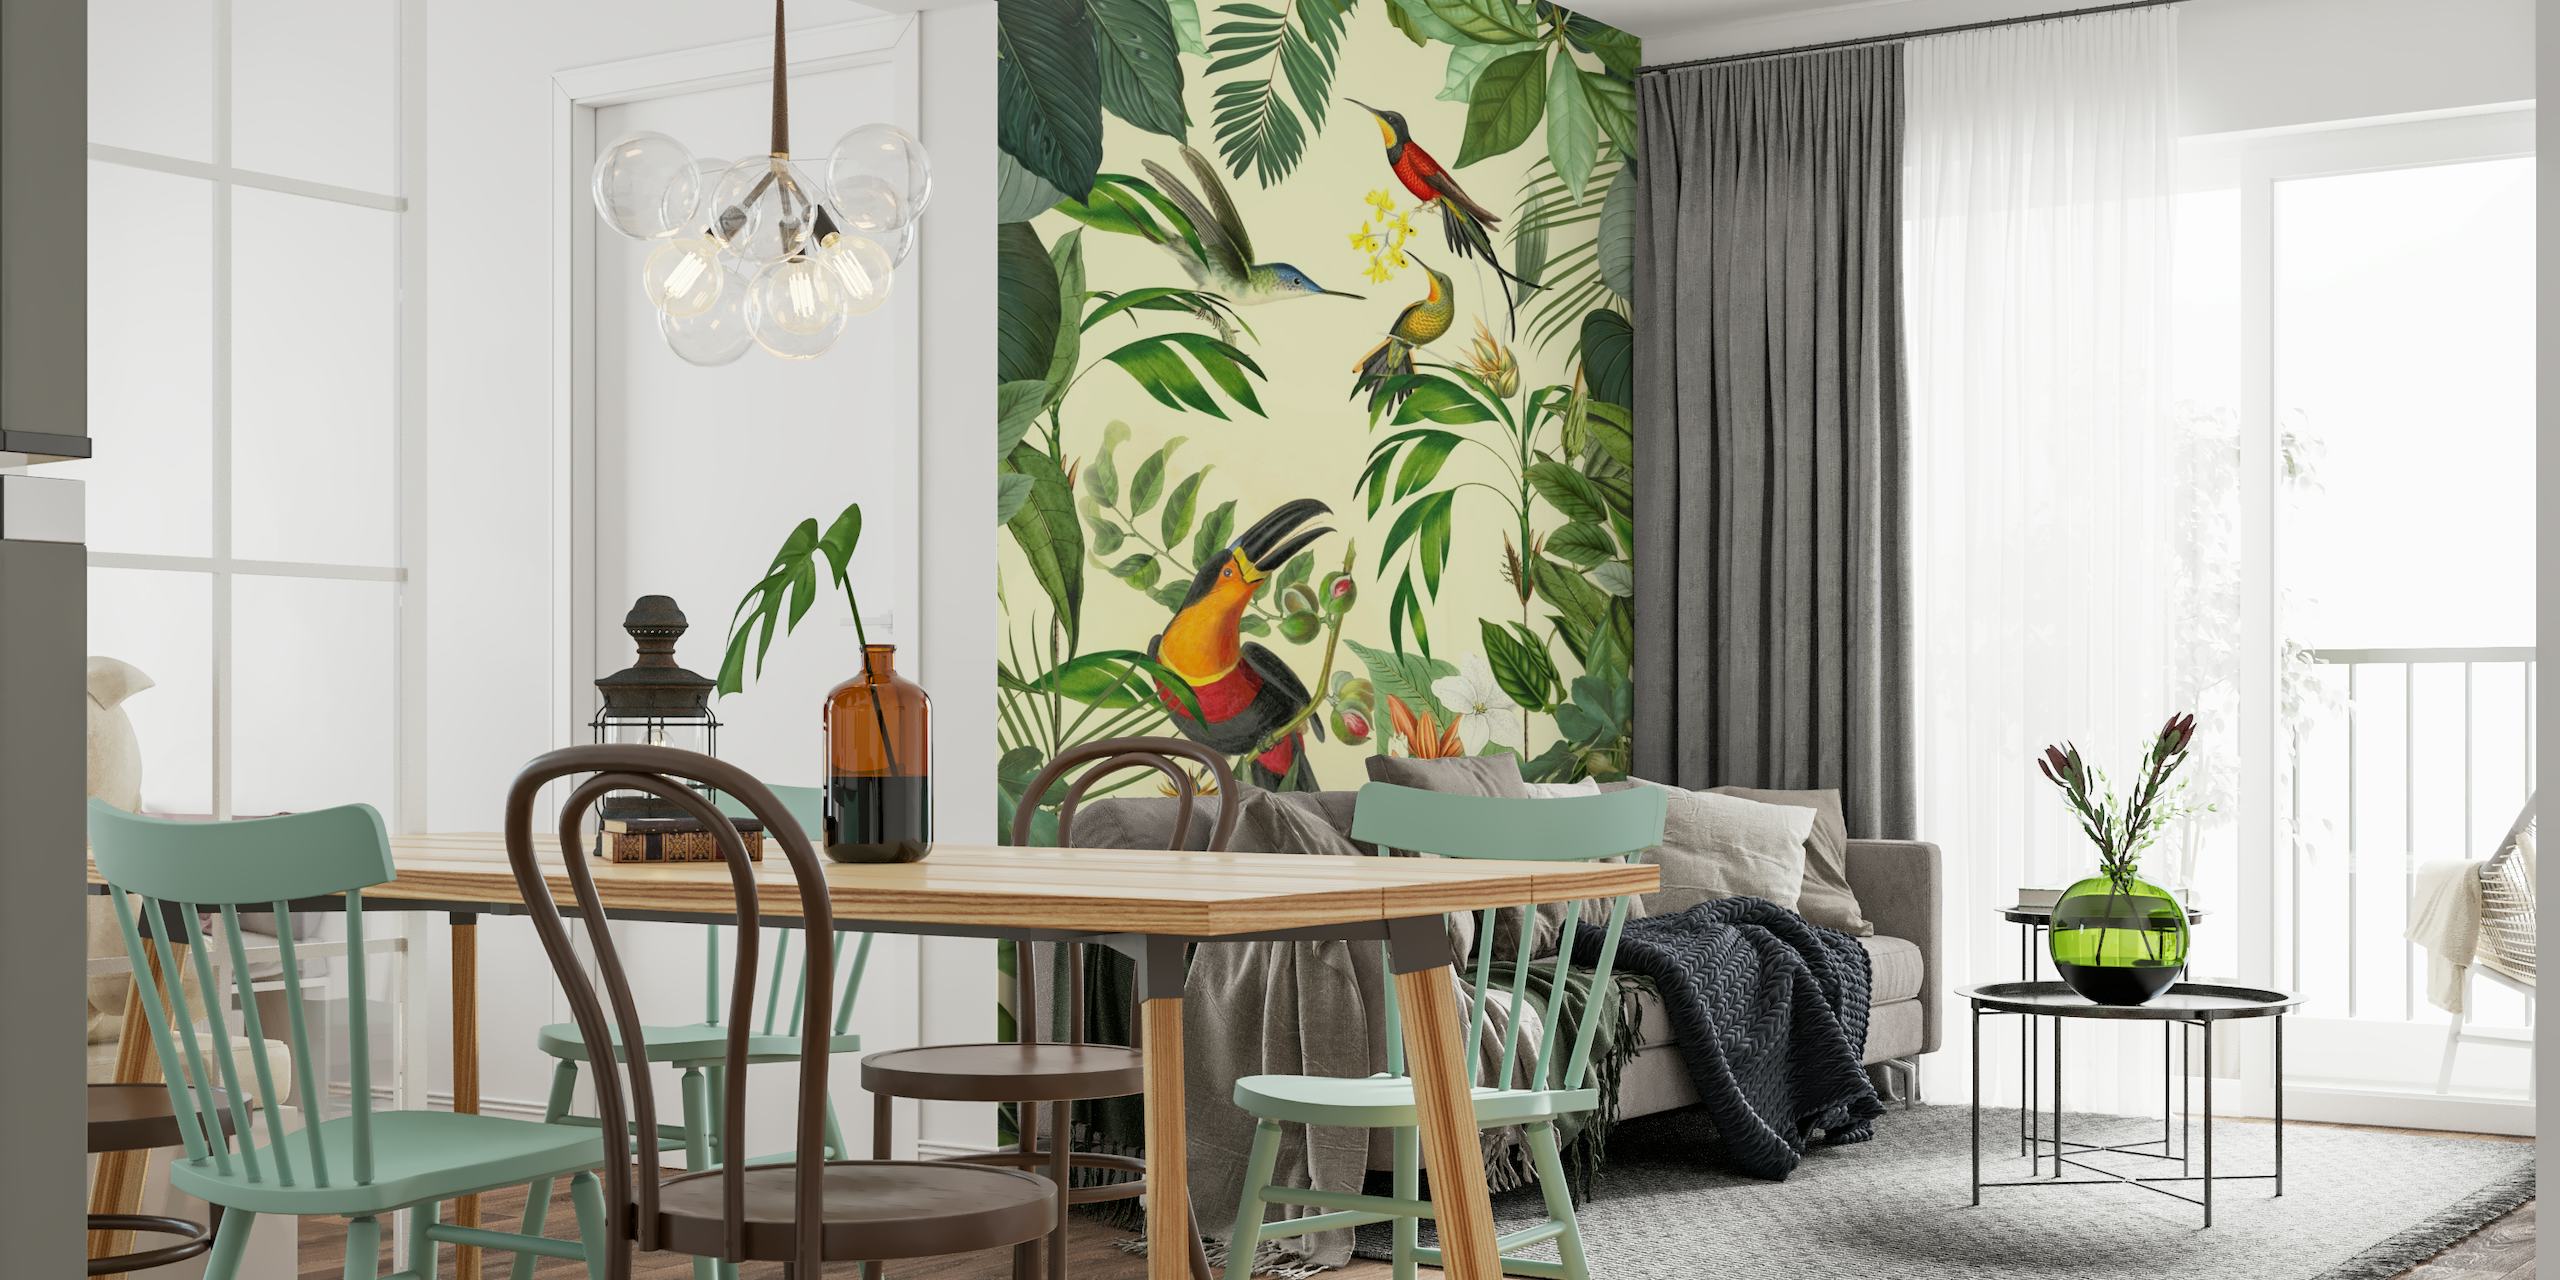 Tropical toucan and hummingbirds wall mural displaying vibrant wildlife and lush greenery